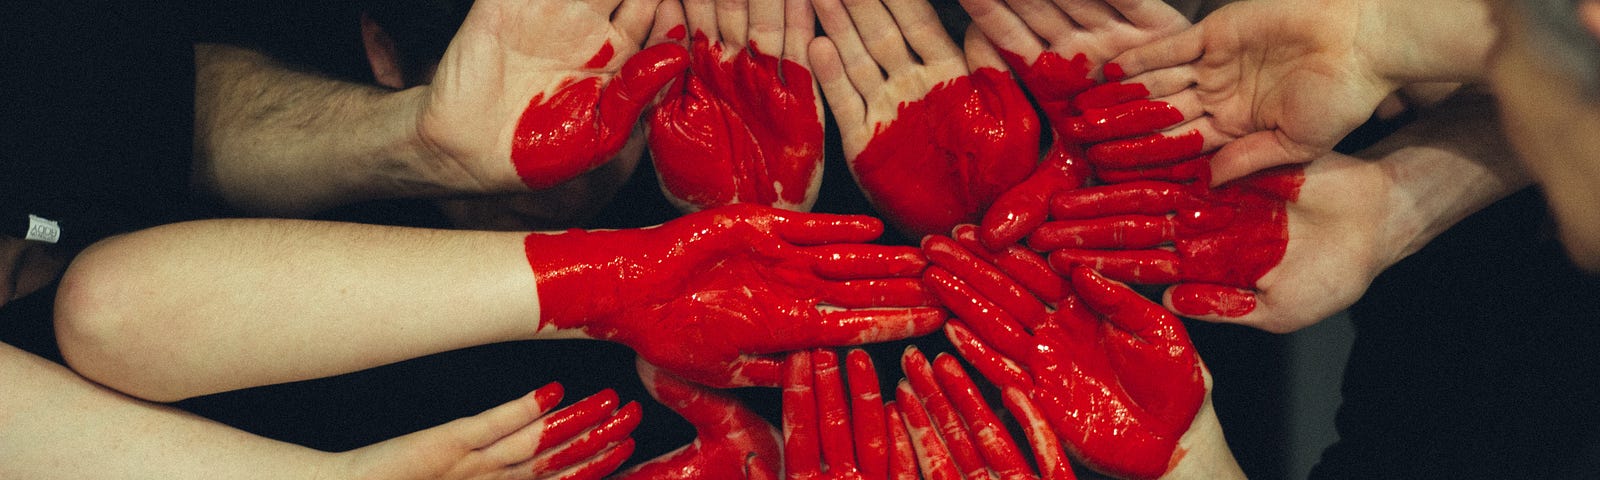 We have you in our hands…heart shape of painted hands.